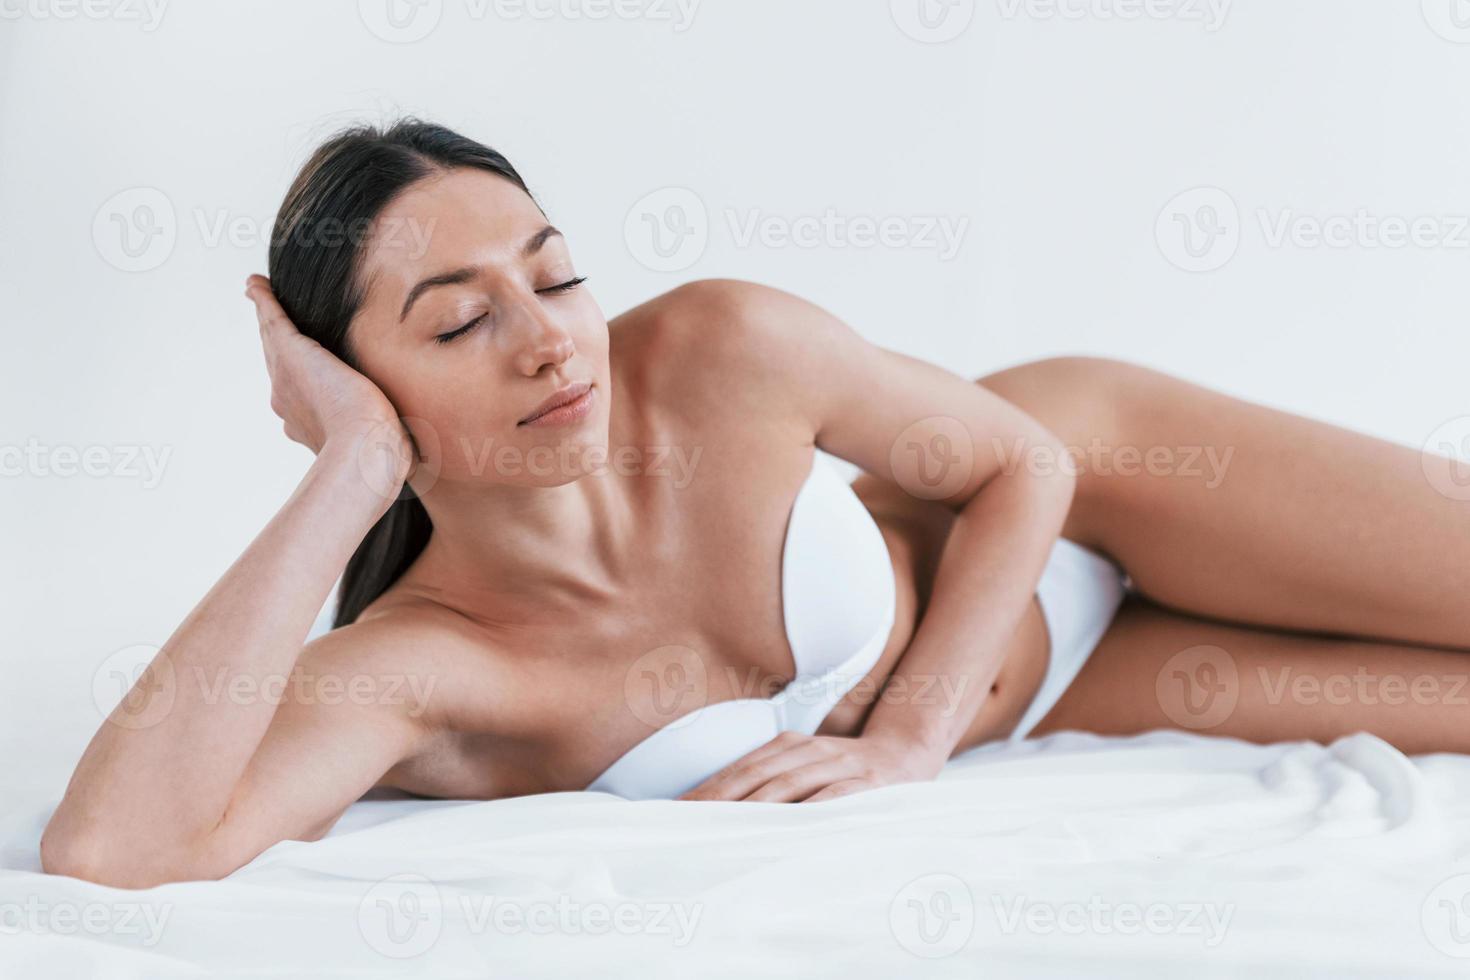 Young woman in underwear and with nice body shape lying down in the studio against white background photo